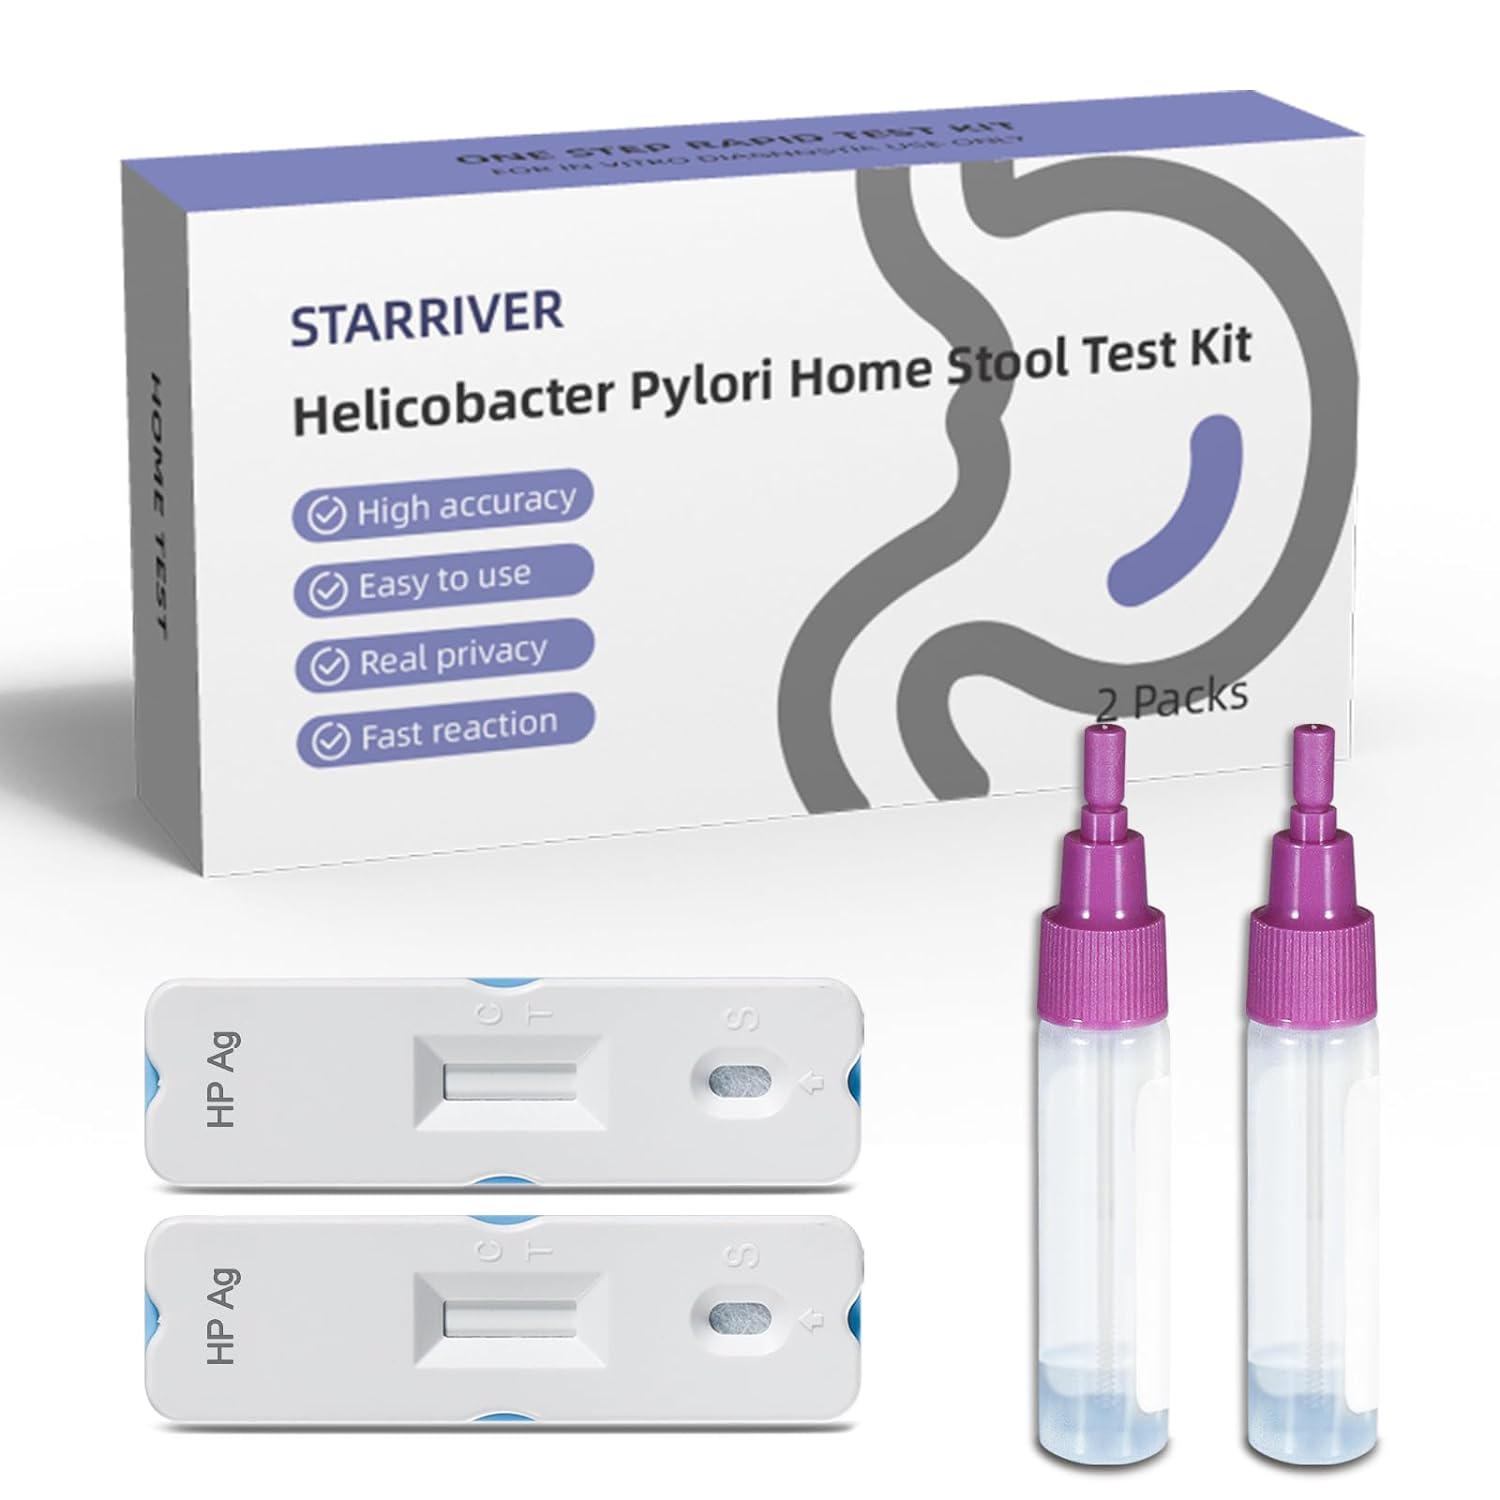 STARRIVER 2 Test H Pylori Test Kit, Helicobacter Pylori Home Stool Test Kits, h. Pylori Stool (Antigen) Self-Test Detection Kits at Home, Easy to Use, Results in 10-15 Minutes